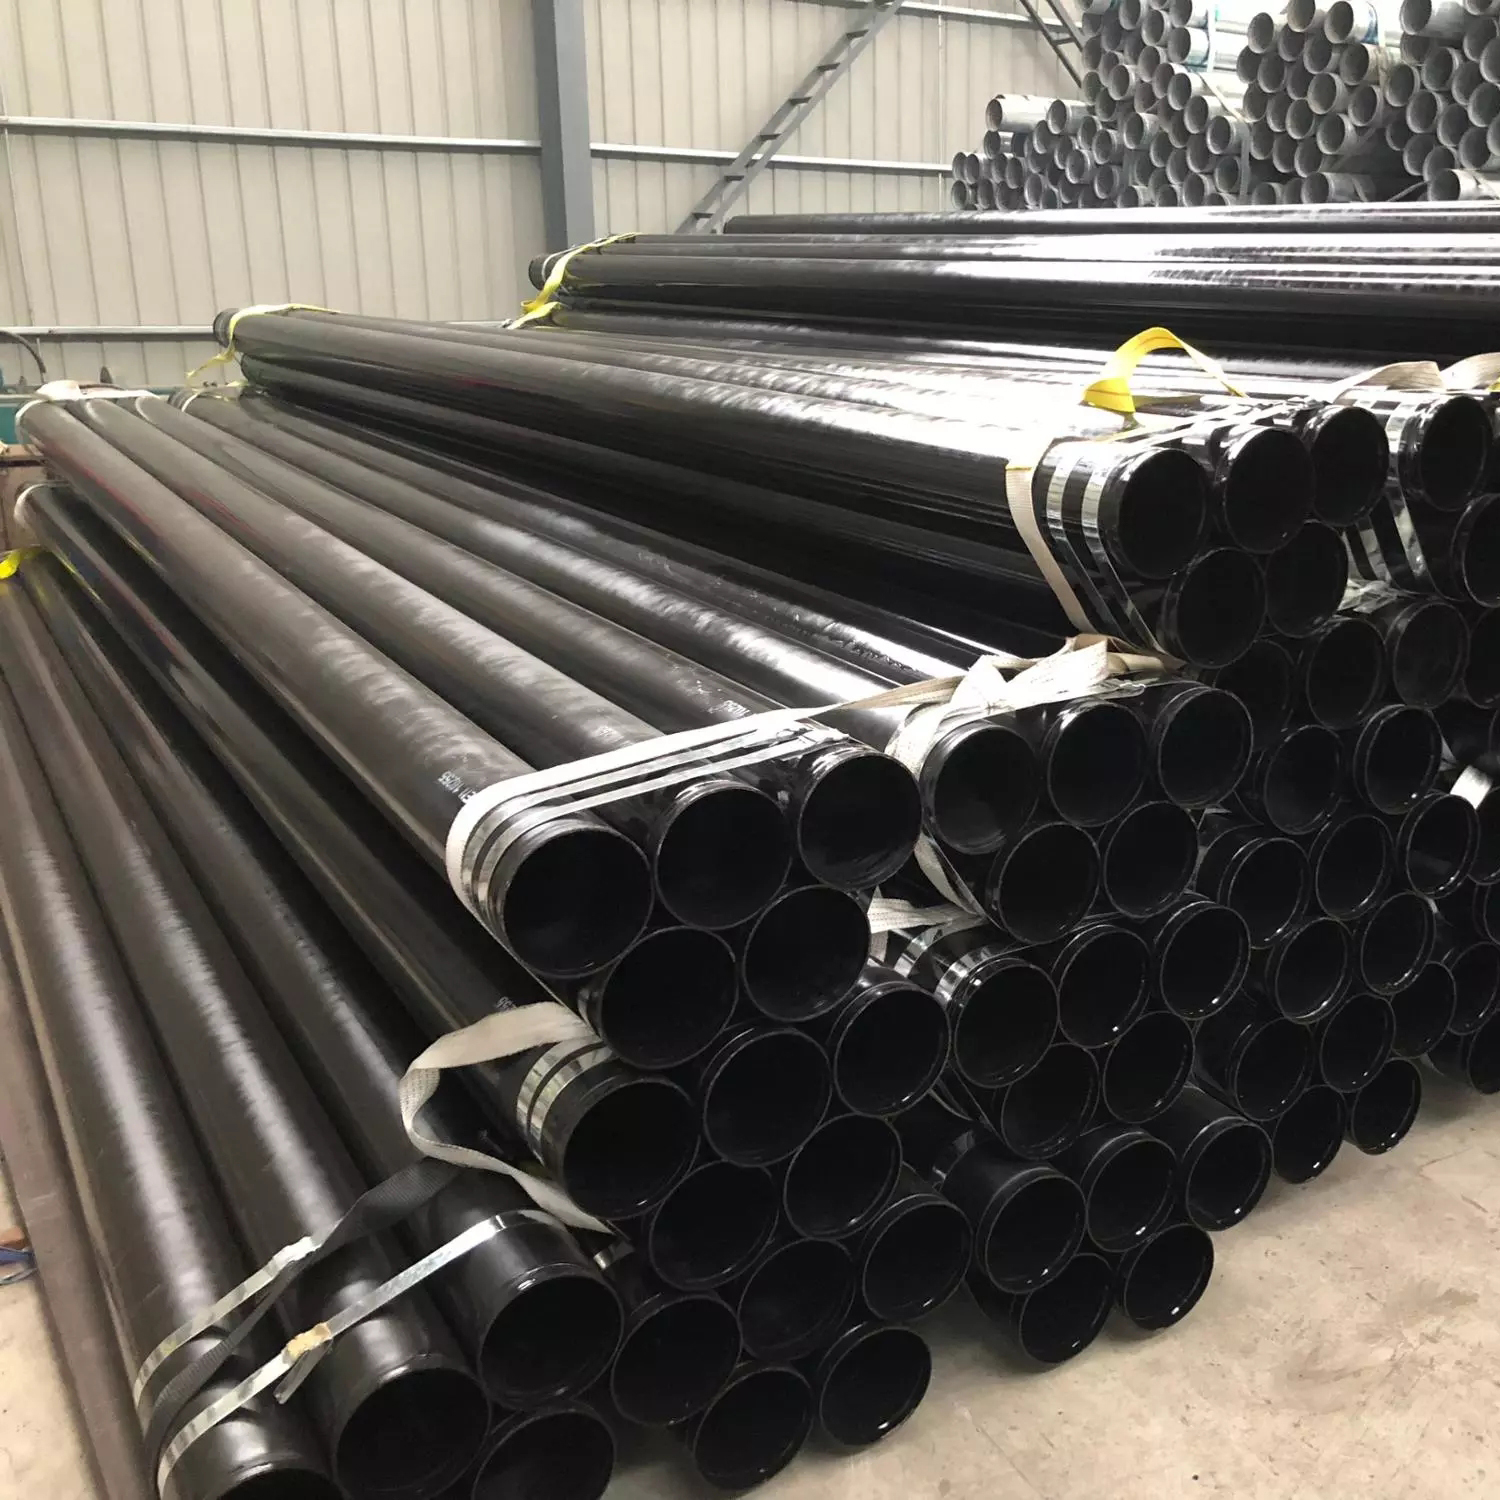 Applications Category of Finishing Seamless Steel Tubes